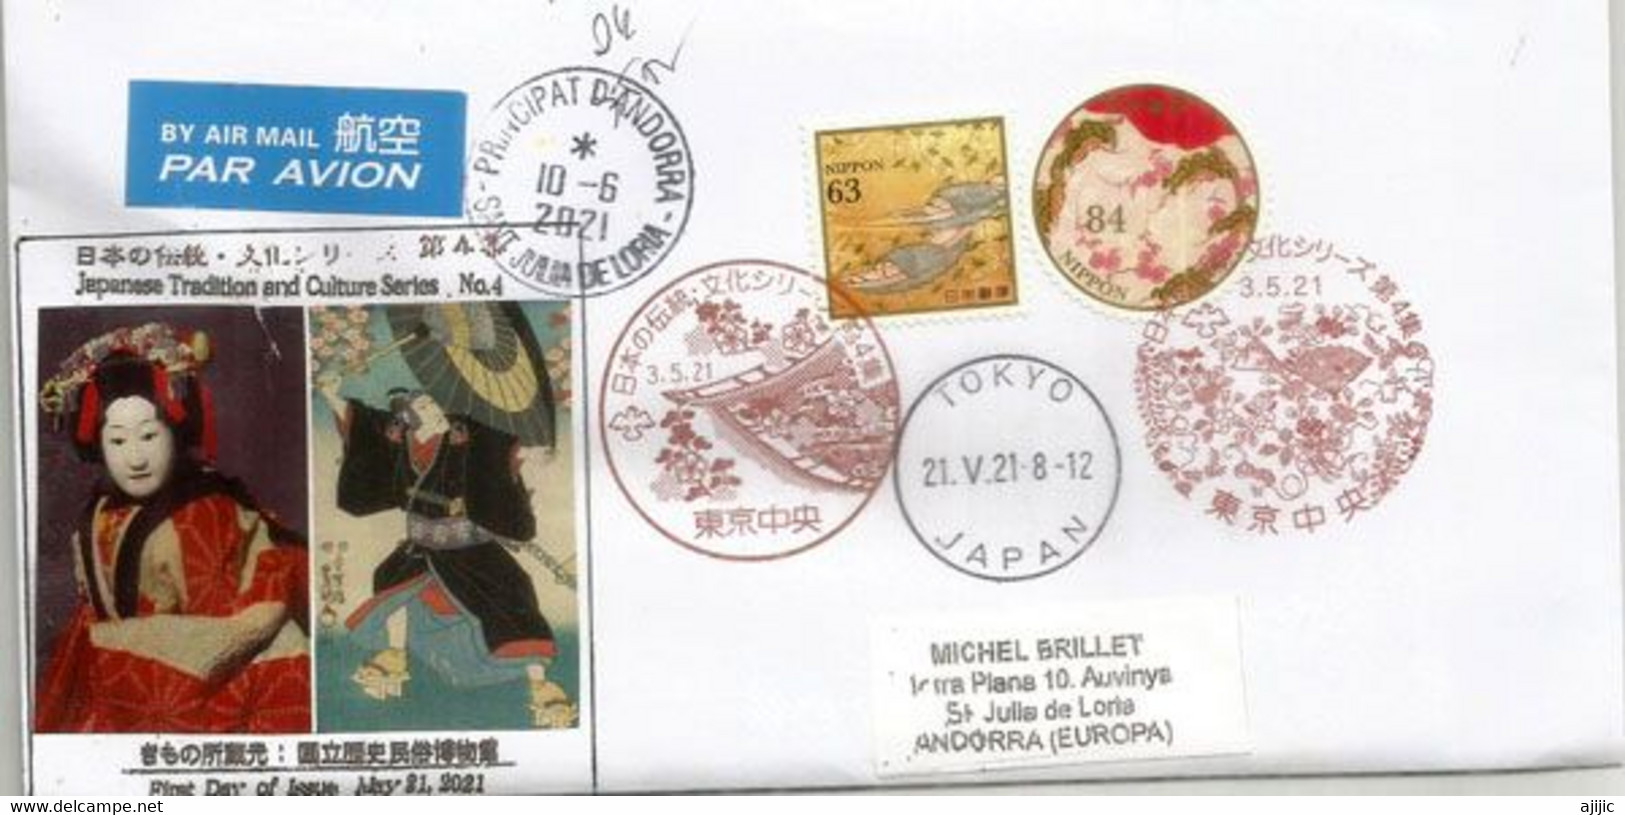 2021 Japan Tradition & Culture Serie, Letter From Tokyo, Sent To Andorra, With Arrival Postmark - Brieven En Documenten